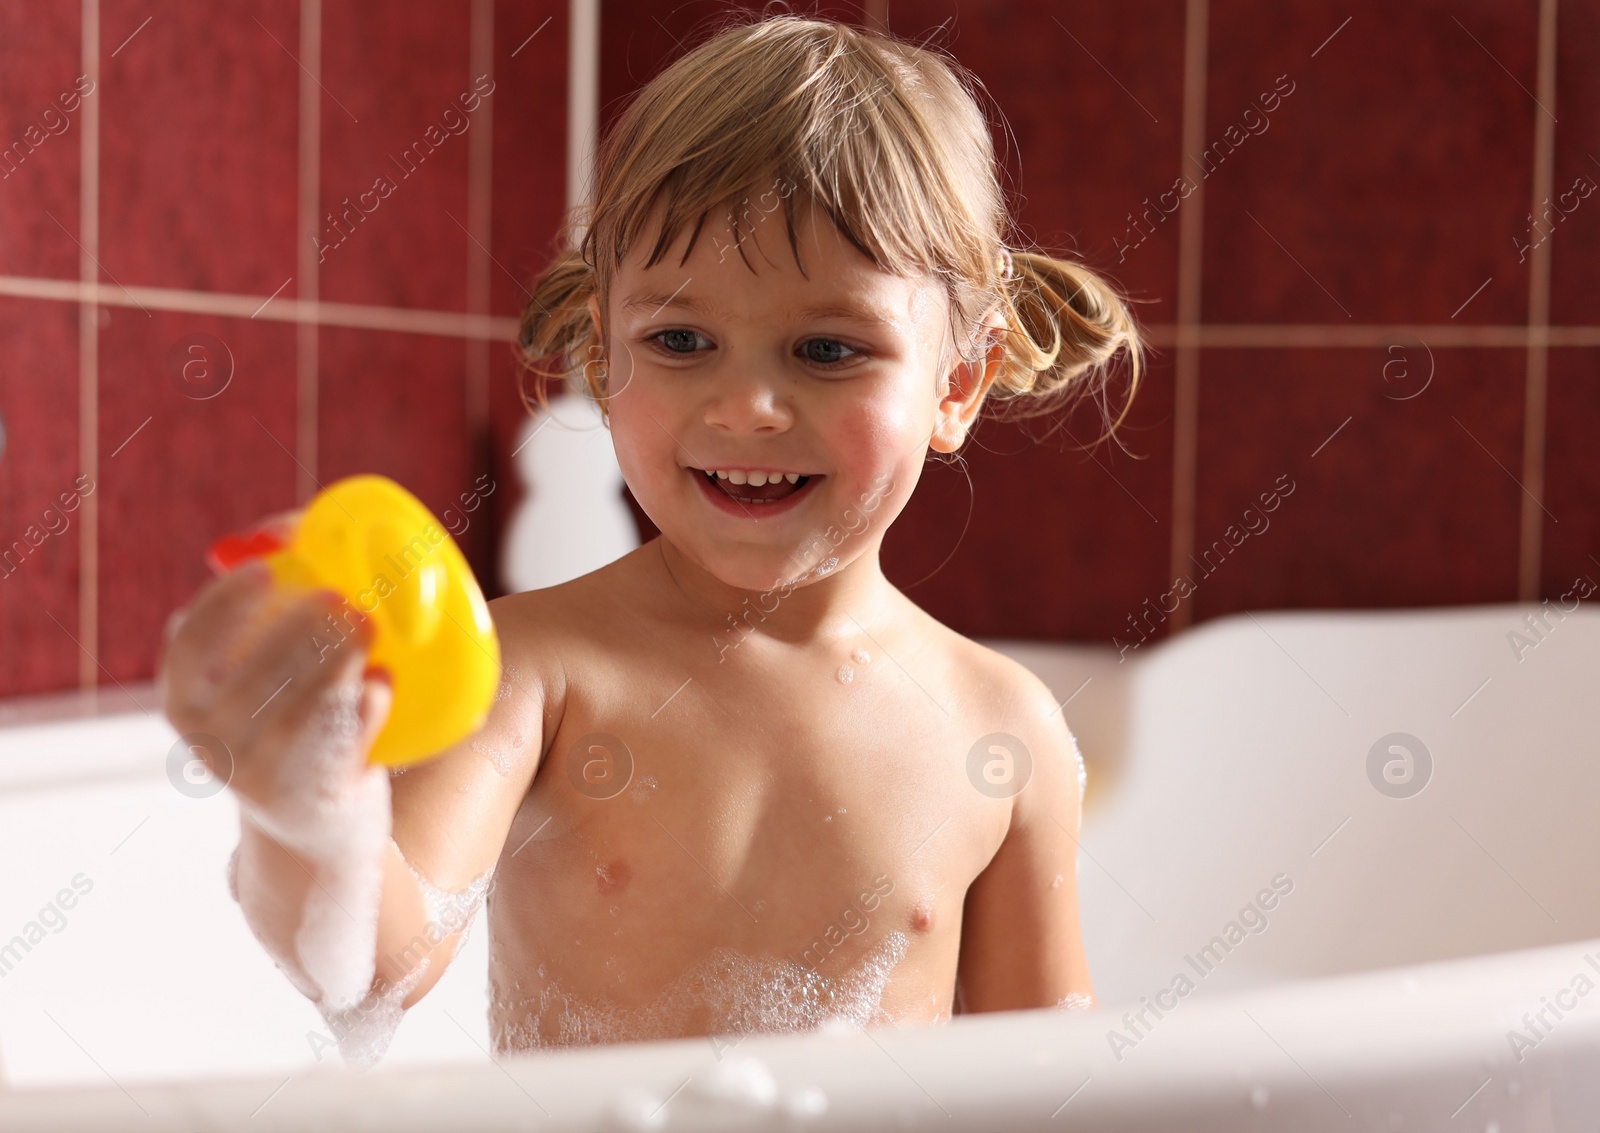 Photo of Smiling girl bathing with toy in tub at home